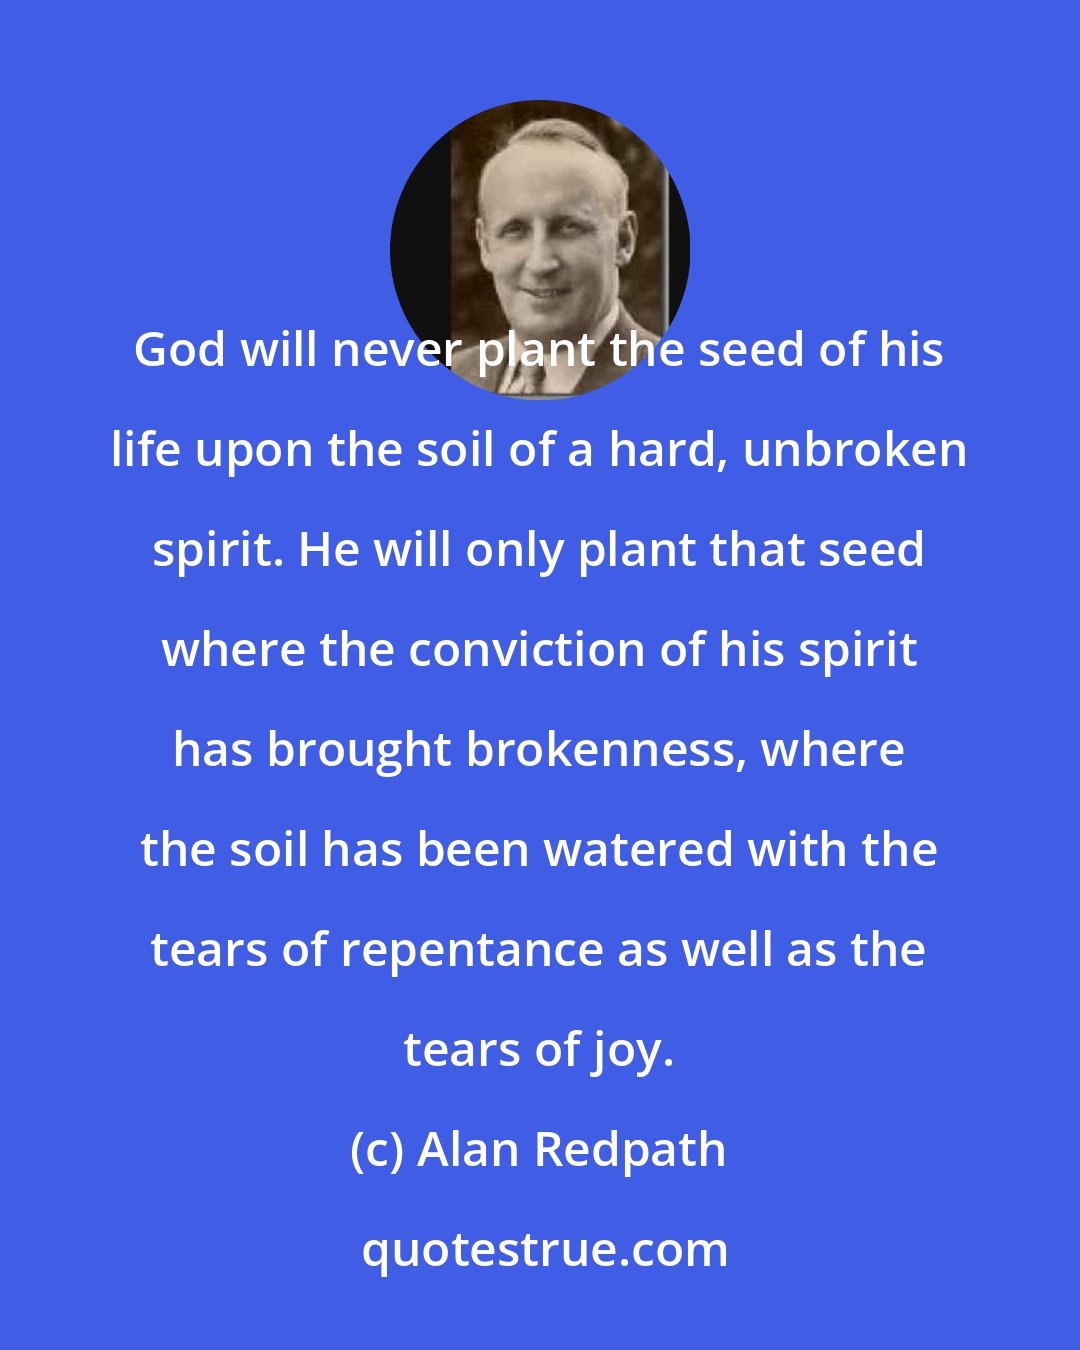 Alan Redpath: God will never plant the seed of his life upon the soil of a hard, unbroken spirit. He will only plant that seed where the conviction of his spirit has brought brokenness, where the soil has been watered with the tears of repentance as well as the tears of joy.